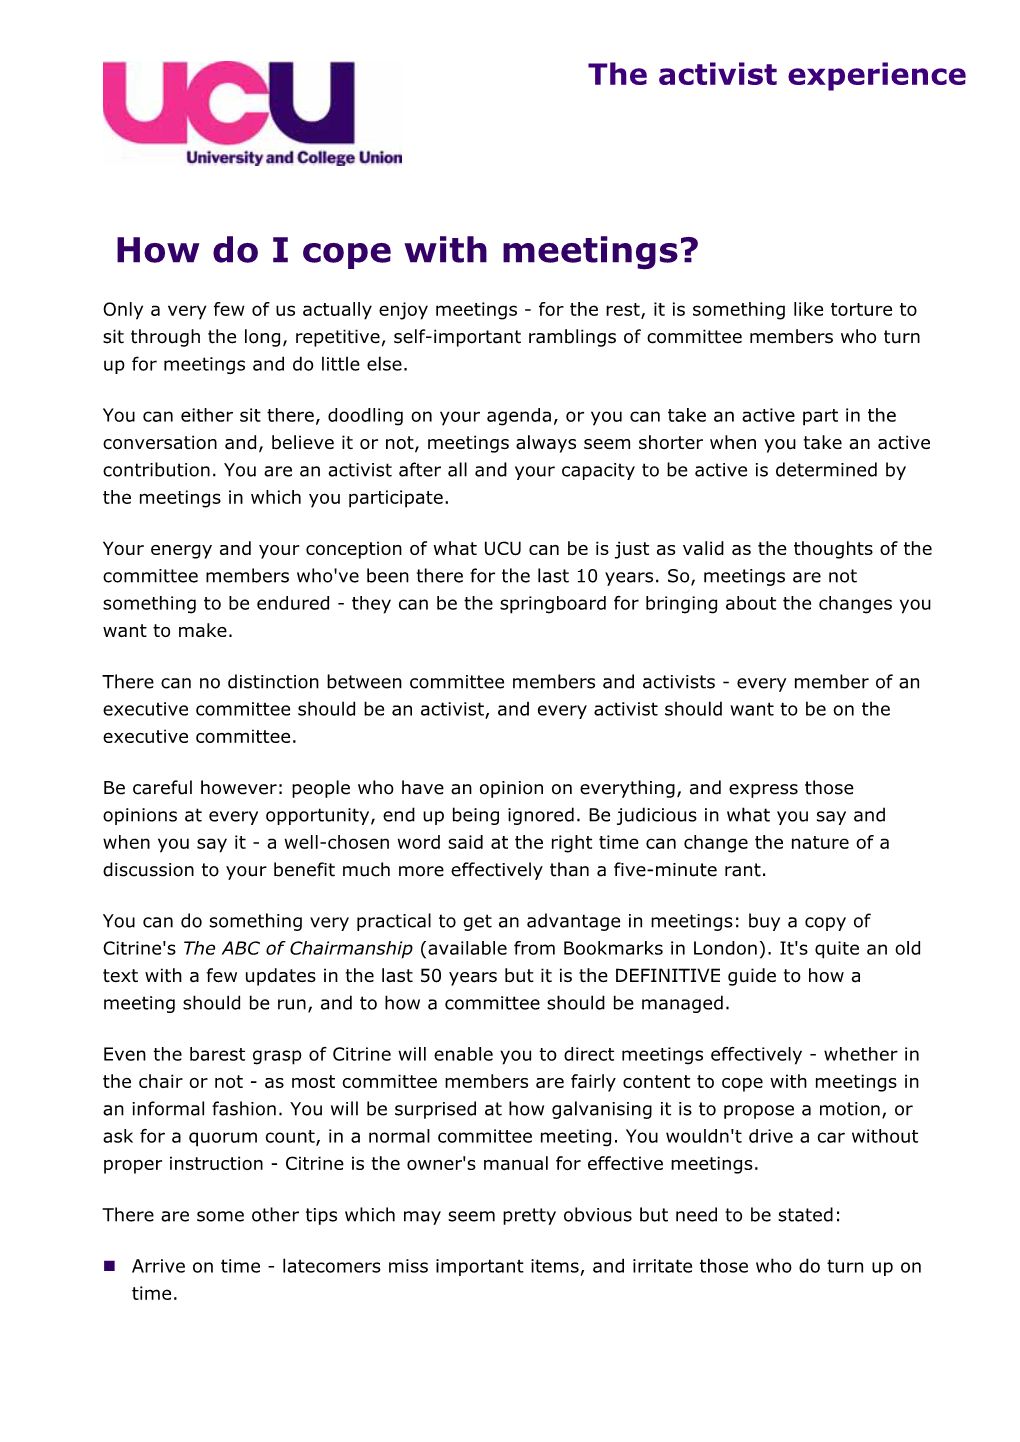 Activist Experience: How Do I Cope with Meetings?